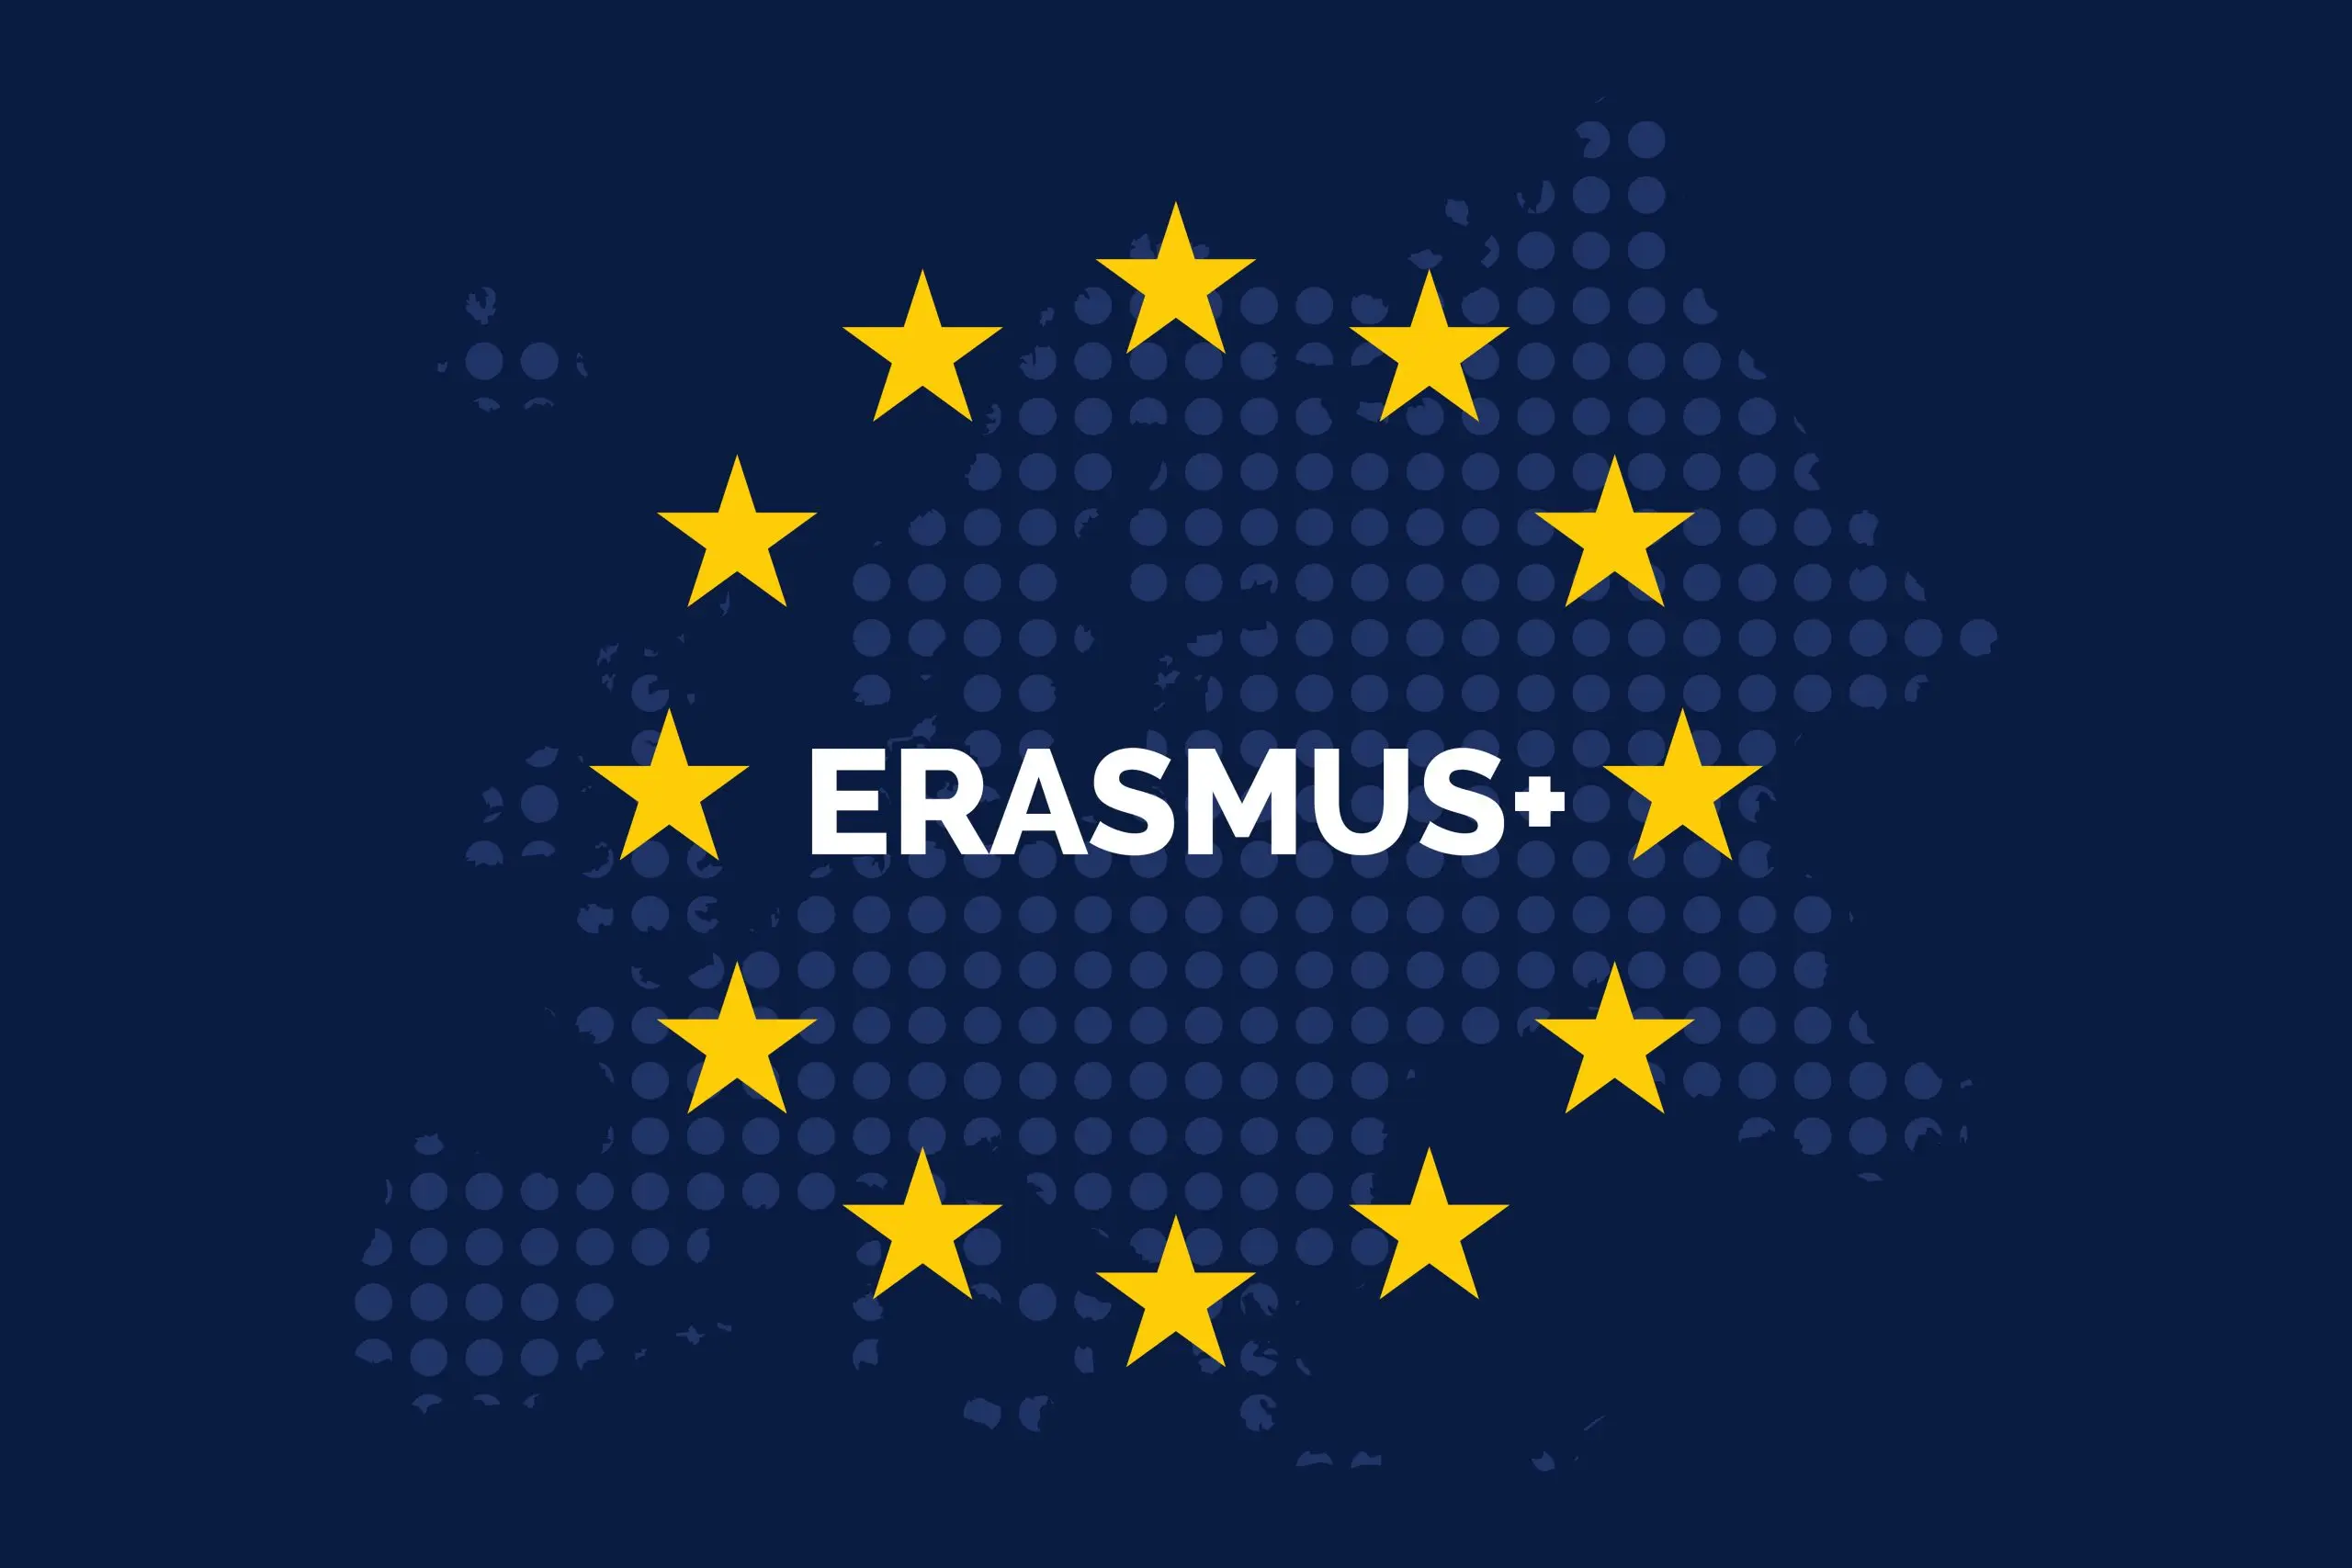 What-are-the-Erasmus-Program-and-the-Erasmus-scaled